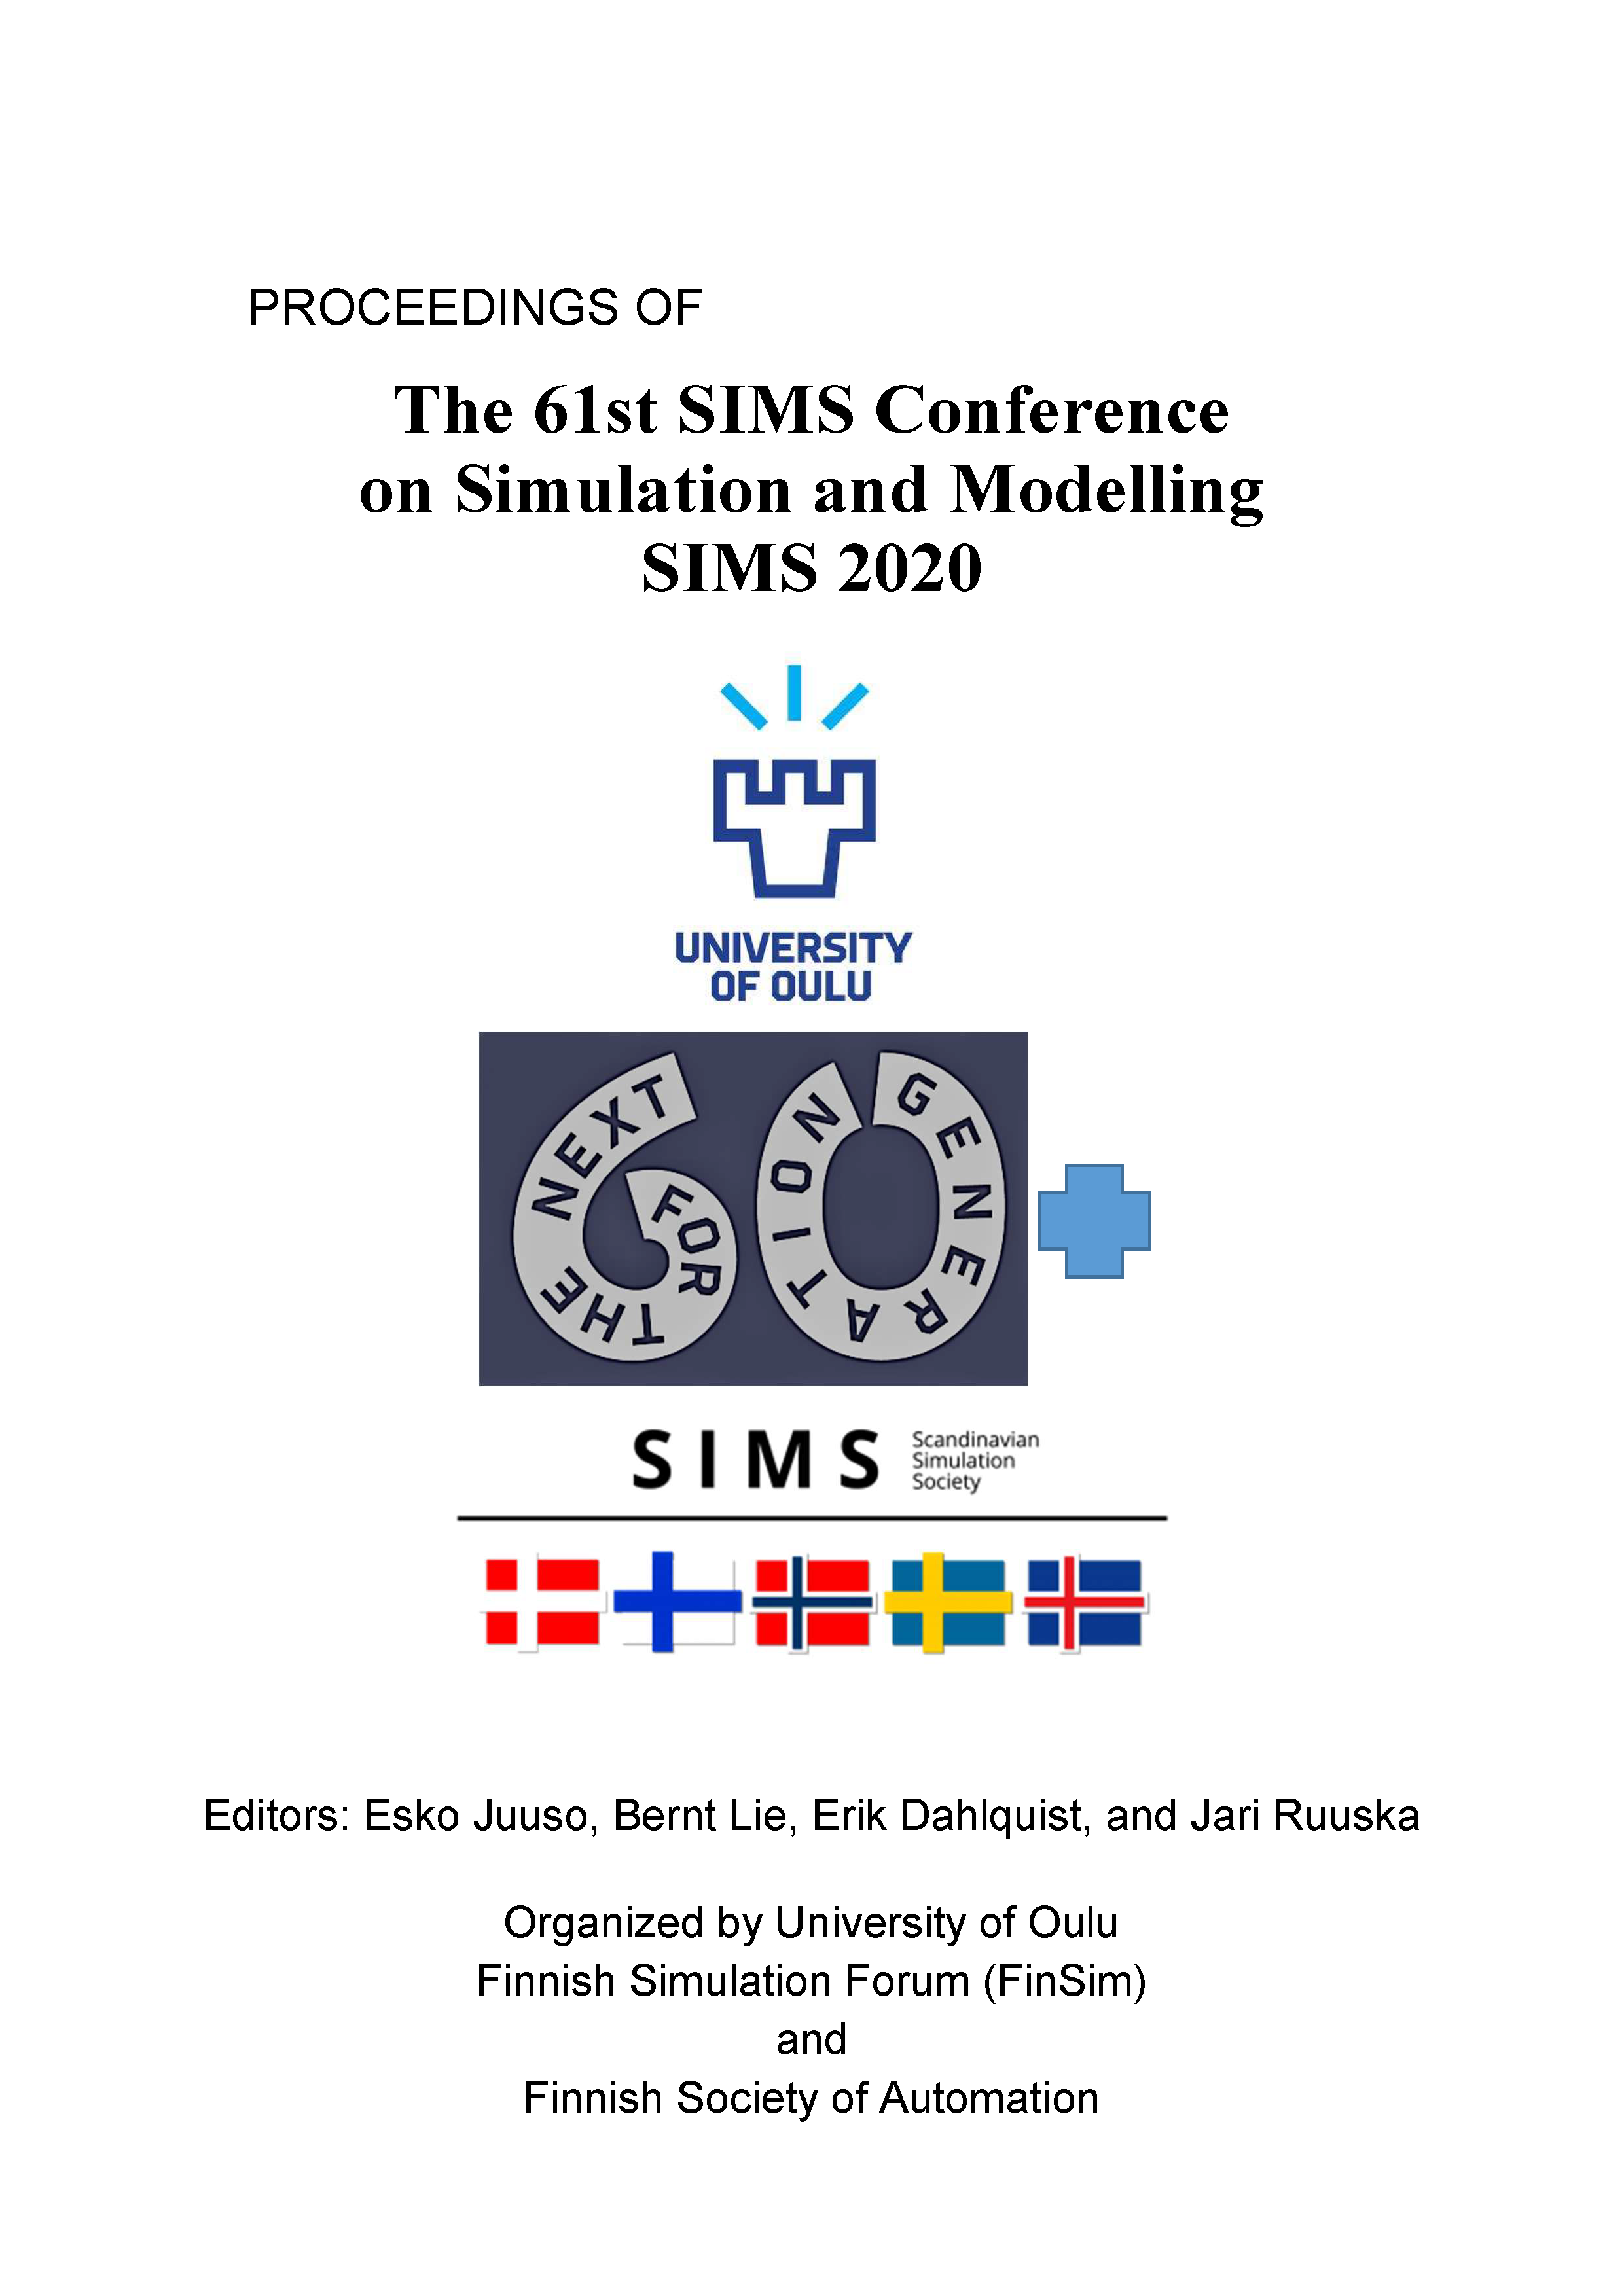 					View Proceedings of The 61st SIMS Conference on Simulation and Modelling SIMS 2020, September 22-24, Virtual Conference, Finland
				